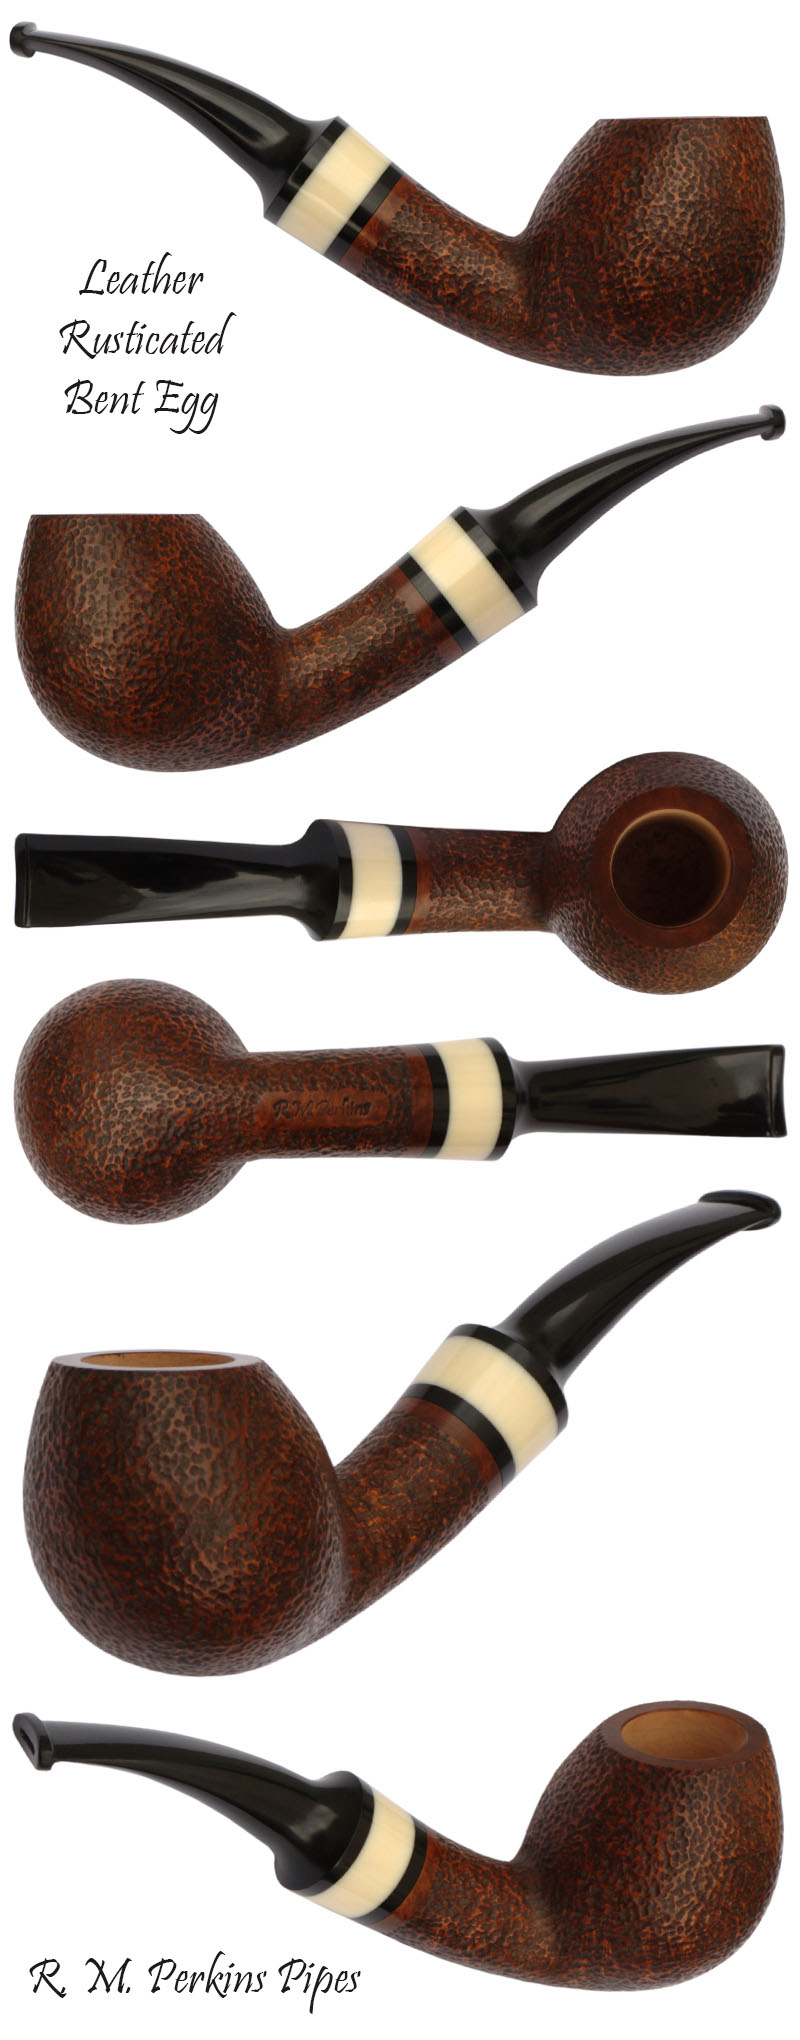 Leather Rusticated Bent Egg